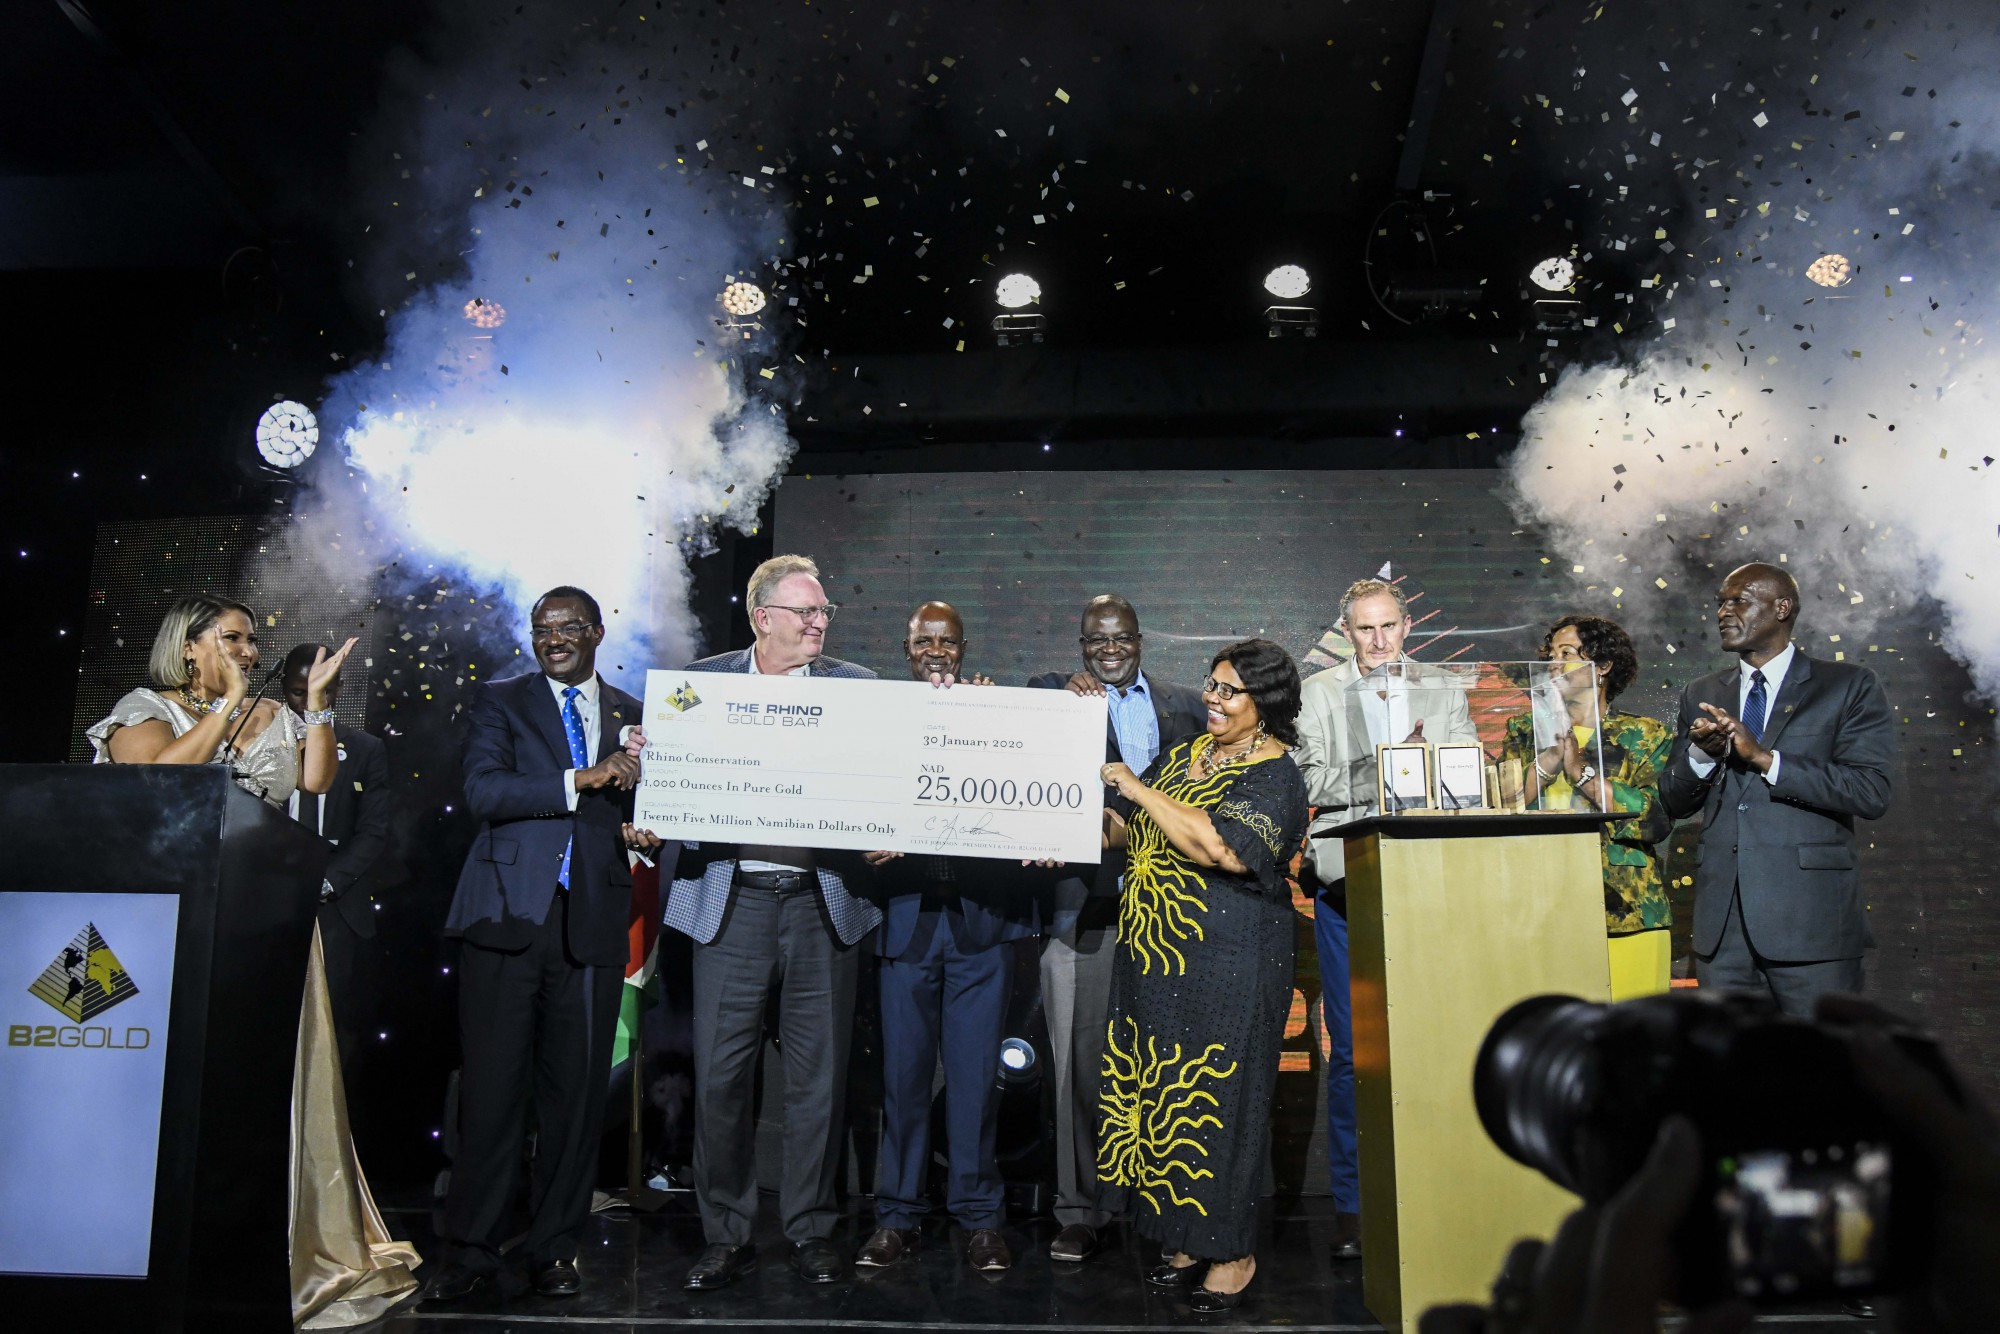 Clive Johnson (President, CEO &amp; Director, B2Gold Corp.) handing a cheque of NAD $25,000,000 (approx. USD $1,500,000)  to various beneficiaries  From left to right: Dr. Leake Hangala ( Director, B2Gold Namibia Proprietary Limited), Clive Johnson, Simson Uri-Khob (CEO, Save the Rhino Trust), John Kasaona (Executive Director, Integrated Rural Development and Nature Conservation), Honorable Bernadette Jagger (Deputy Minister of Environment and Tourism), Mark Dawe (Country Manager and Managing Director &ndash; Namibia, B2Gold Corp.), Inge Zaamwani-Kamwi (Adviser to the President of the Republic of Namibia, Dr Hage Geingob) and Tom Alweendo (Minister of Mines and Energy)